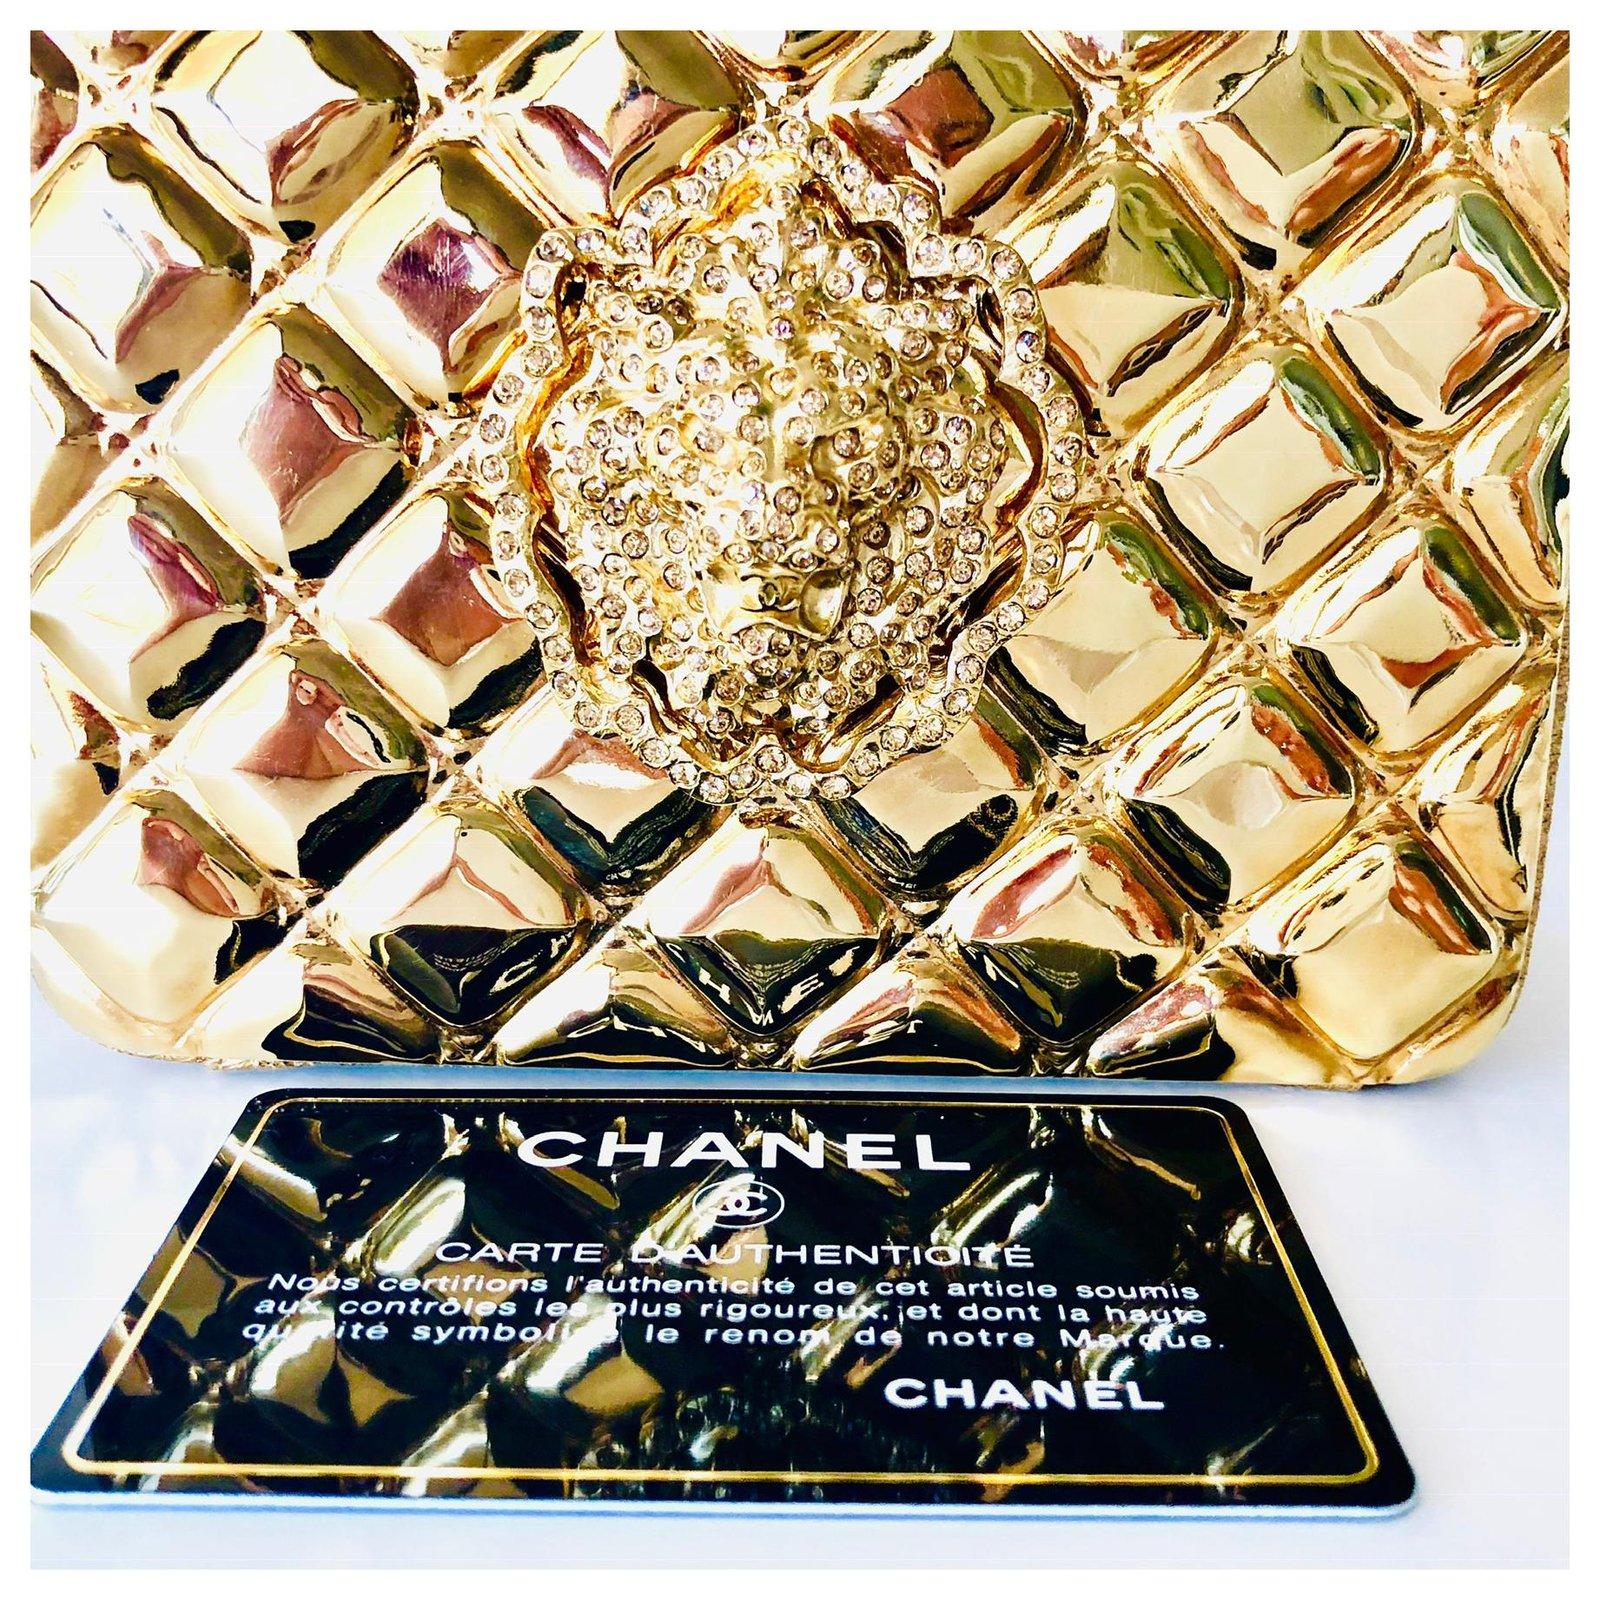 Chanel Minaudiere gold Moscow lion head clutch Swarovski crystals evening bag In Excellent Condition For Sale In Miami, FL